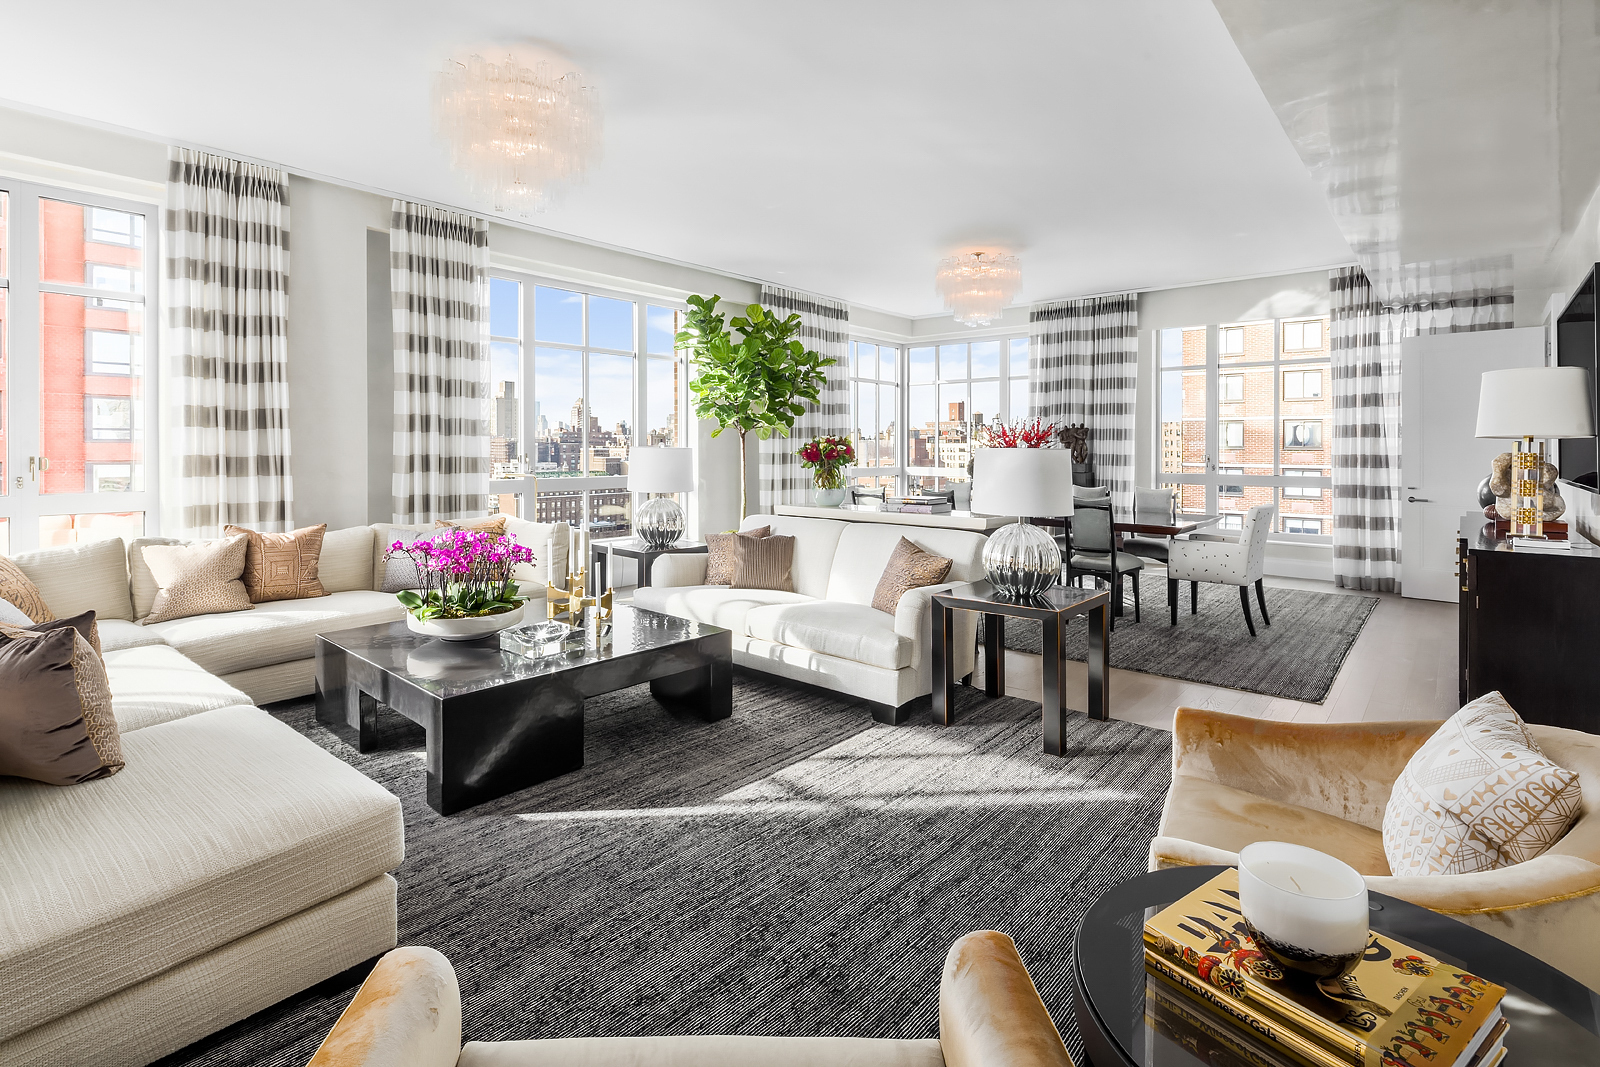 200 East 95th Street 22A, Yorkville, Upper East Side, NYC - 5 Bedrooms  
4.5 Bathrooms  
7 Rooms - 